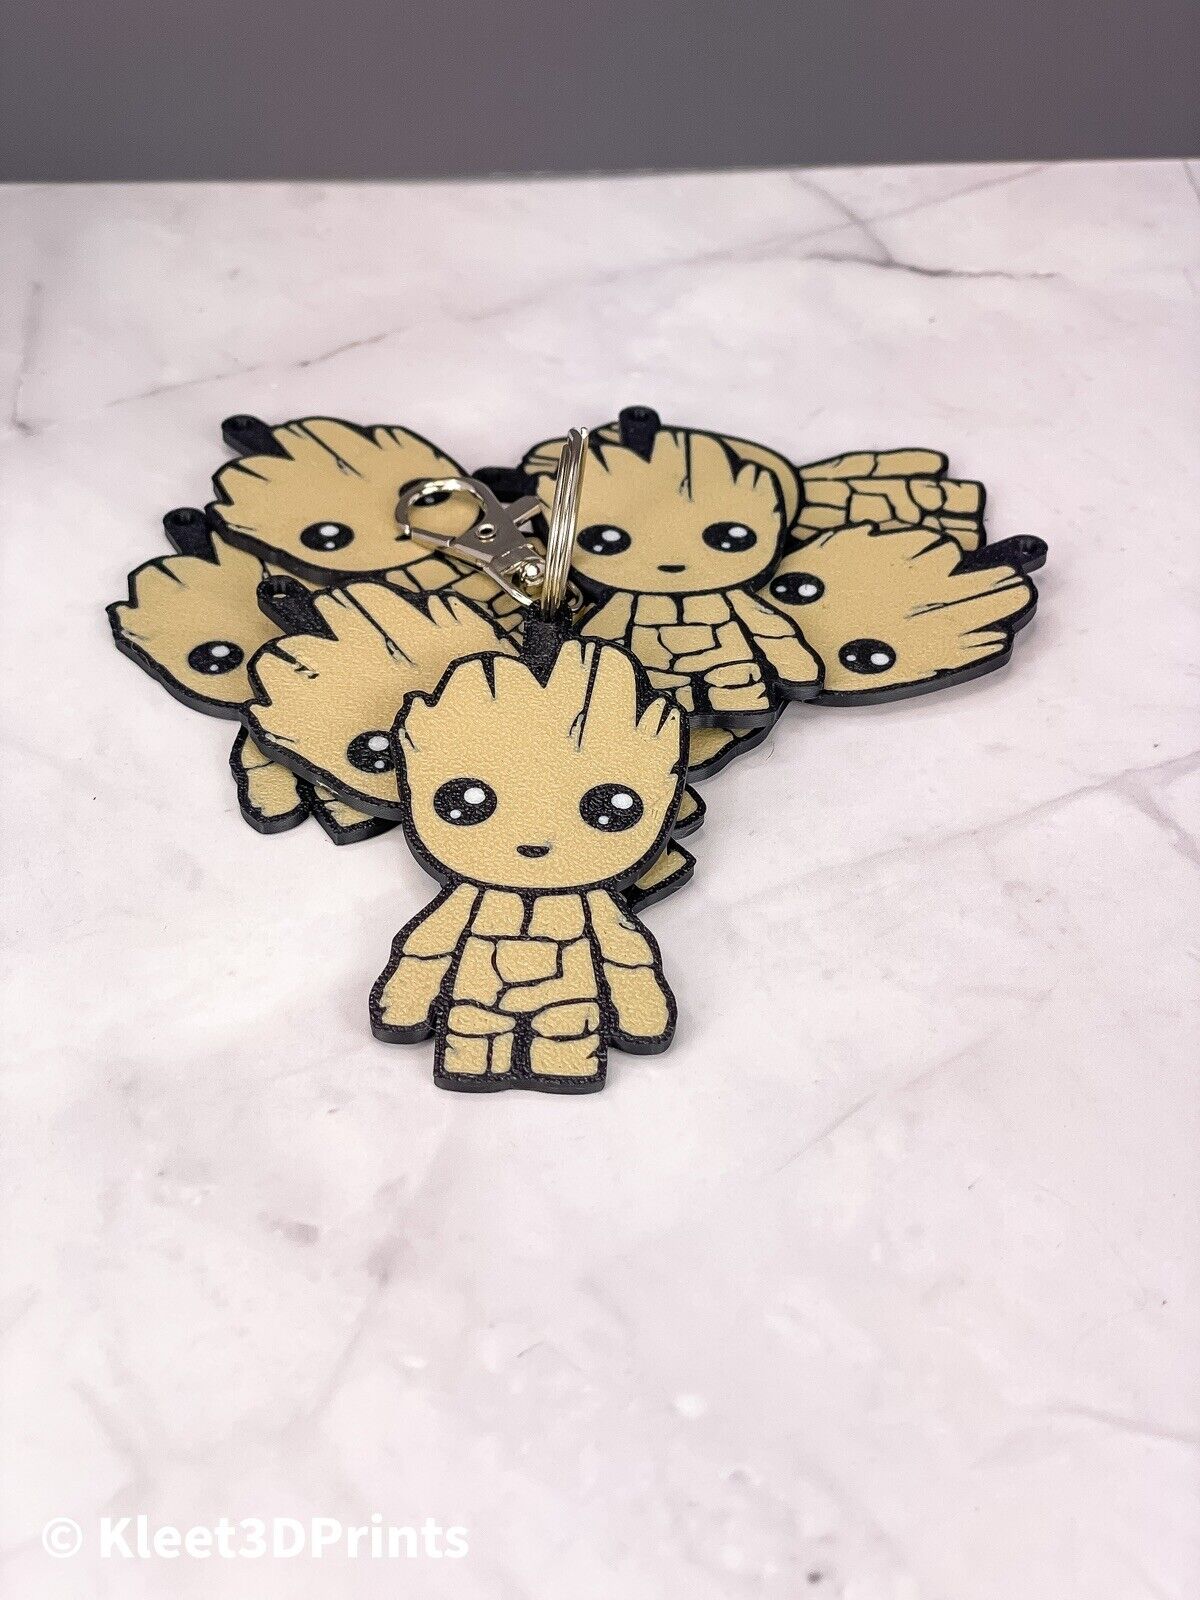 Baby Groot Keychain Charm - Guardians of the Galaxy Merchandise